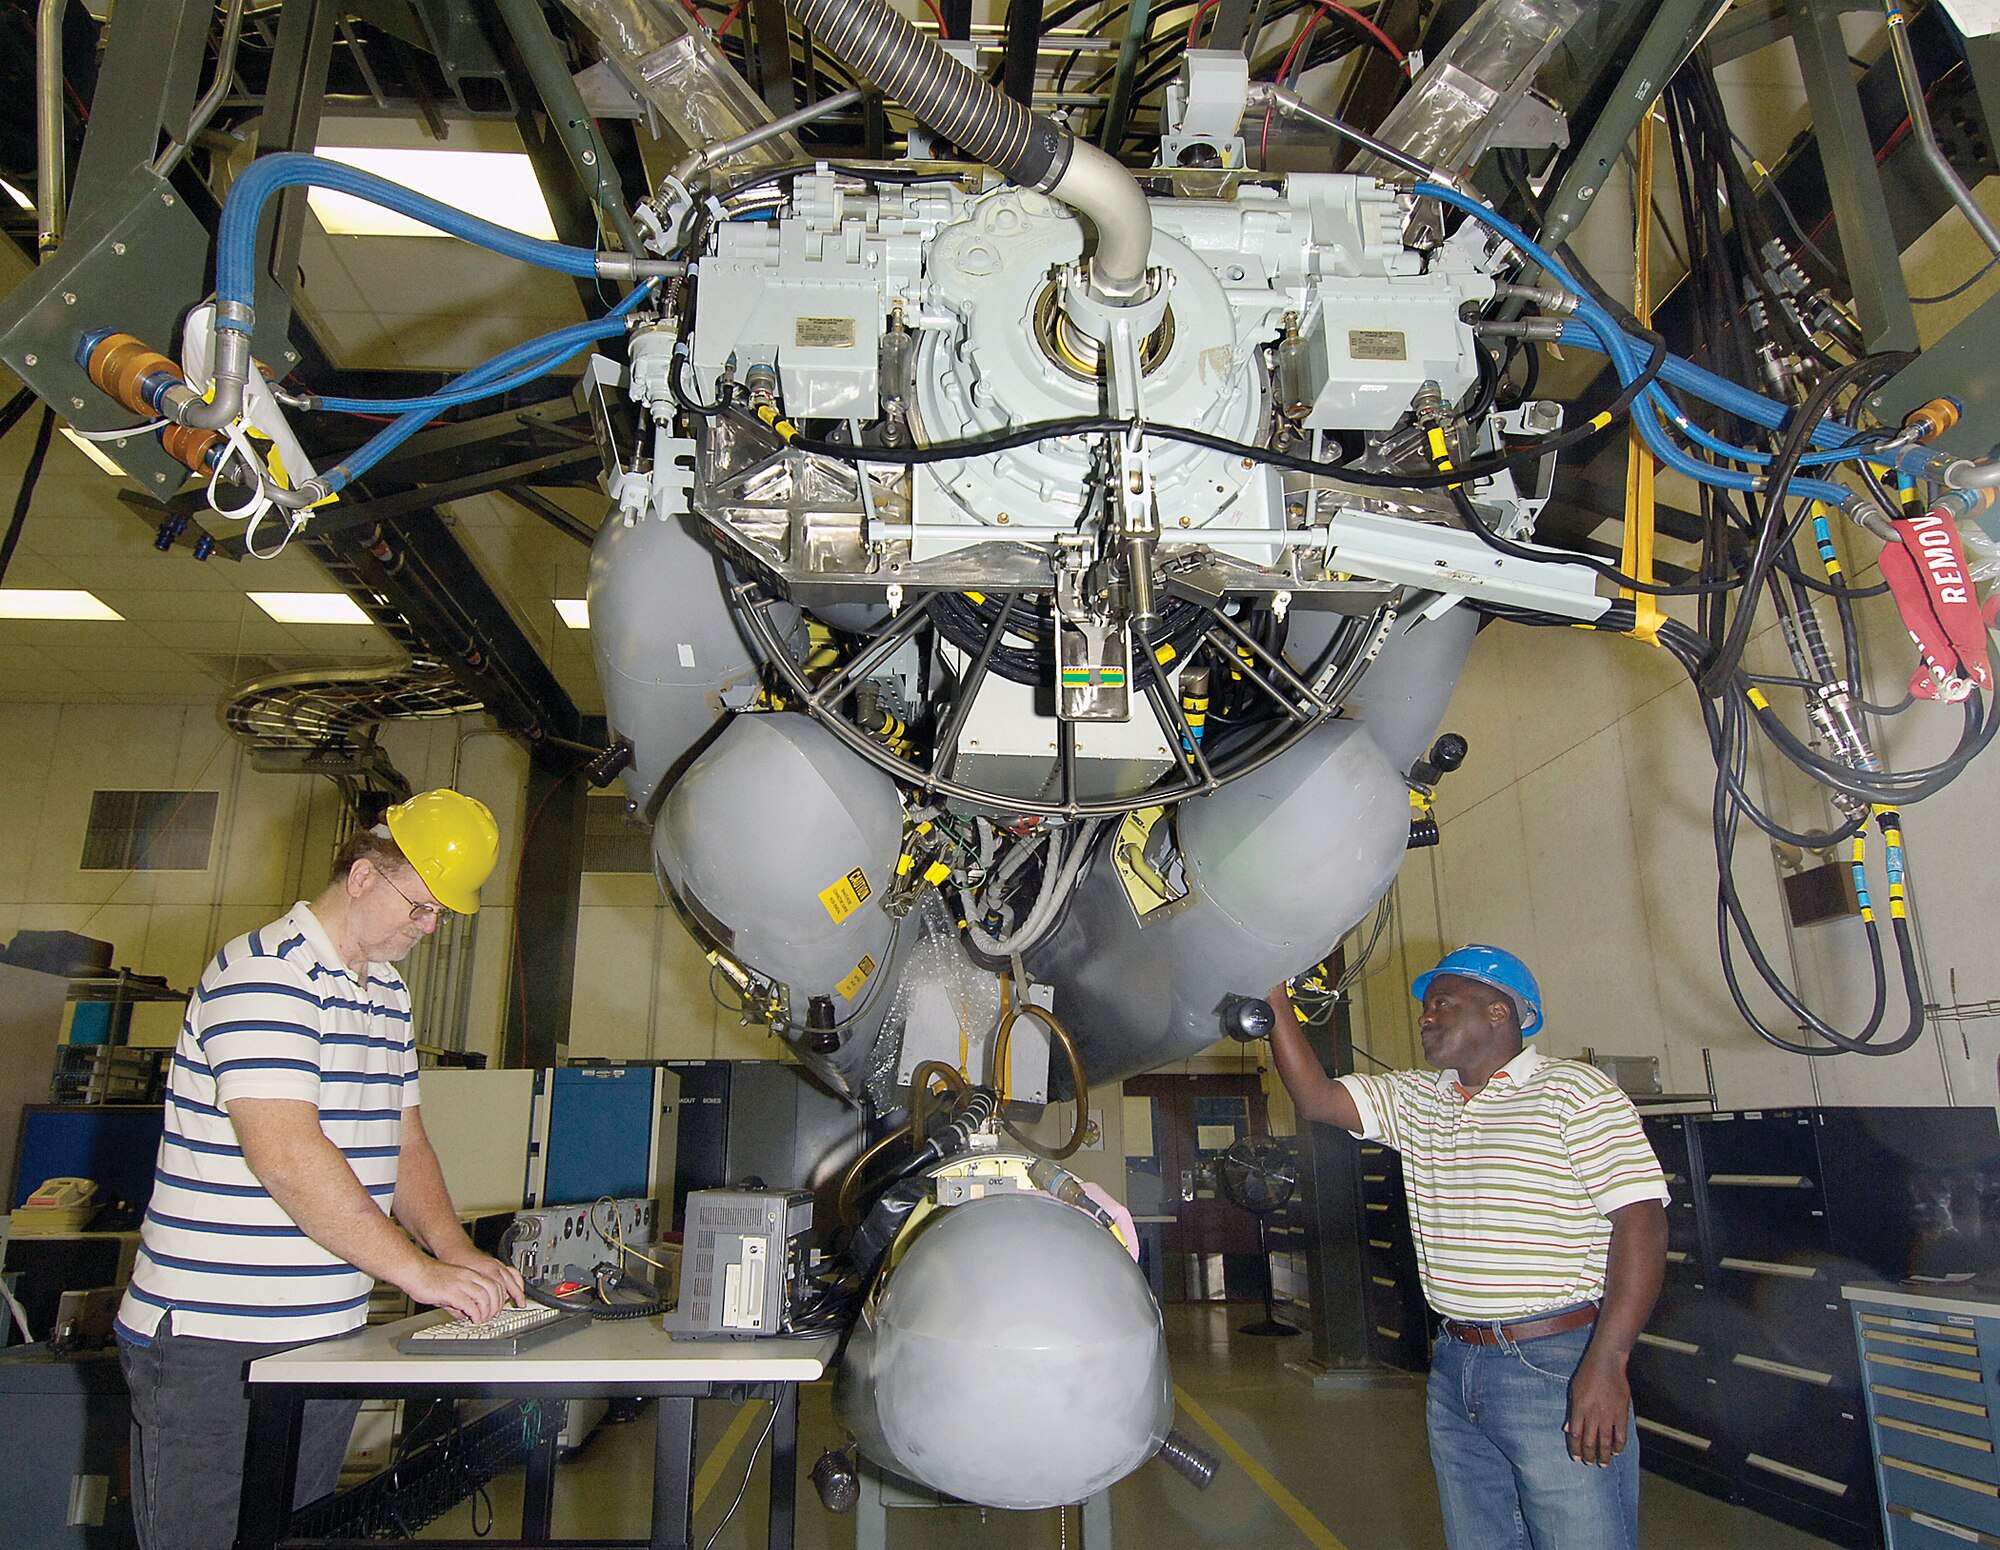 Don Cotter and Scottie Huey, from left, both electrical engineers in the Avionics Integration Support Facility, are dwarfed by a Common Strategic Rotary Launcher used in software maintenance and field support for the cruise missile community.  The launcher would be in a B-52 and because of its nuclear capabilities will be a featured stop during the Tinker Nuclear Immersion Day Nov. 14.  The day will highlight areas where Tinker supports the nuclear mission. (Air Force photo/Margo Wright)